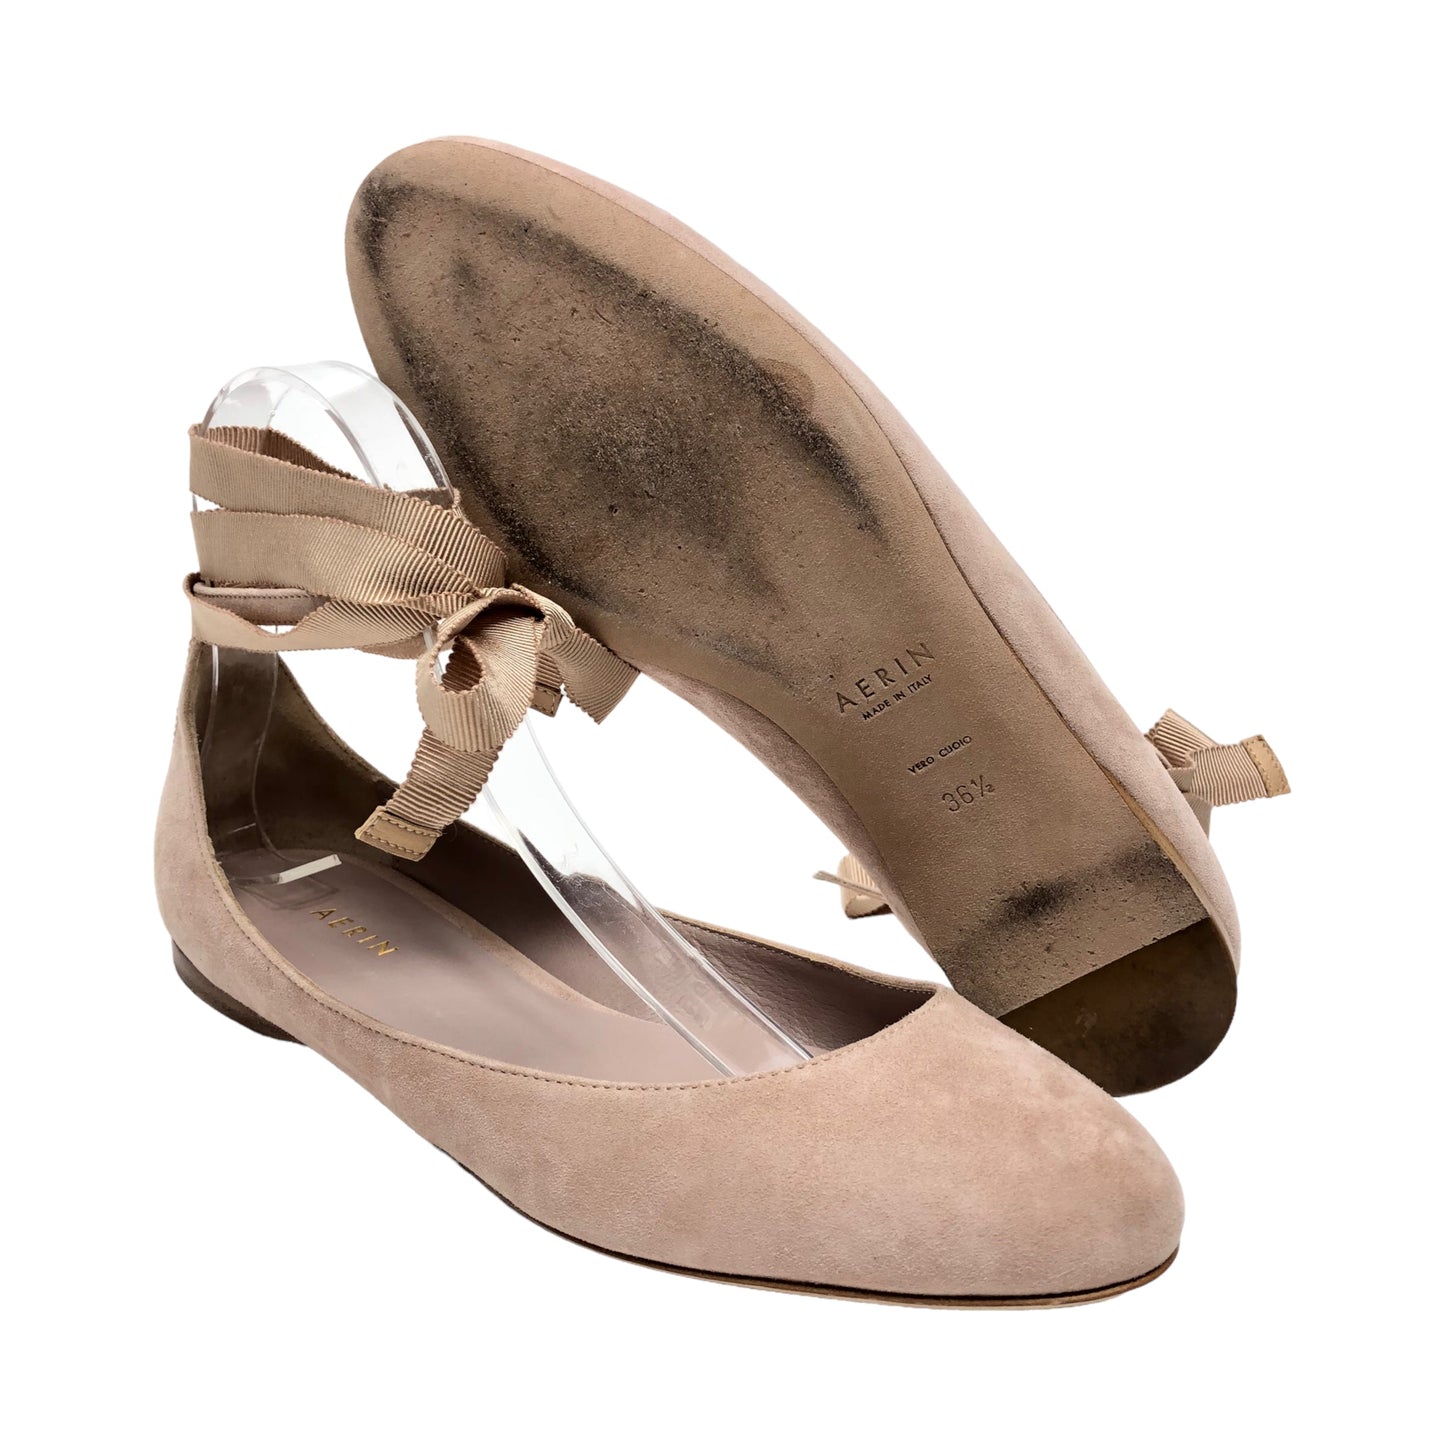 Shoes Flats Ballet By Aerin  Size: 6